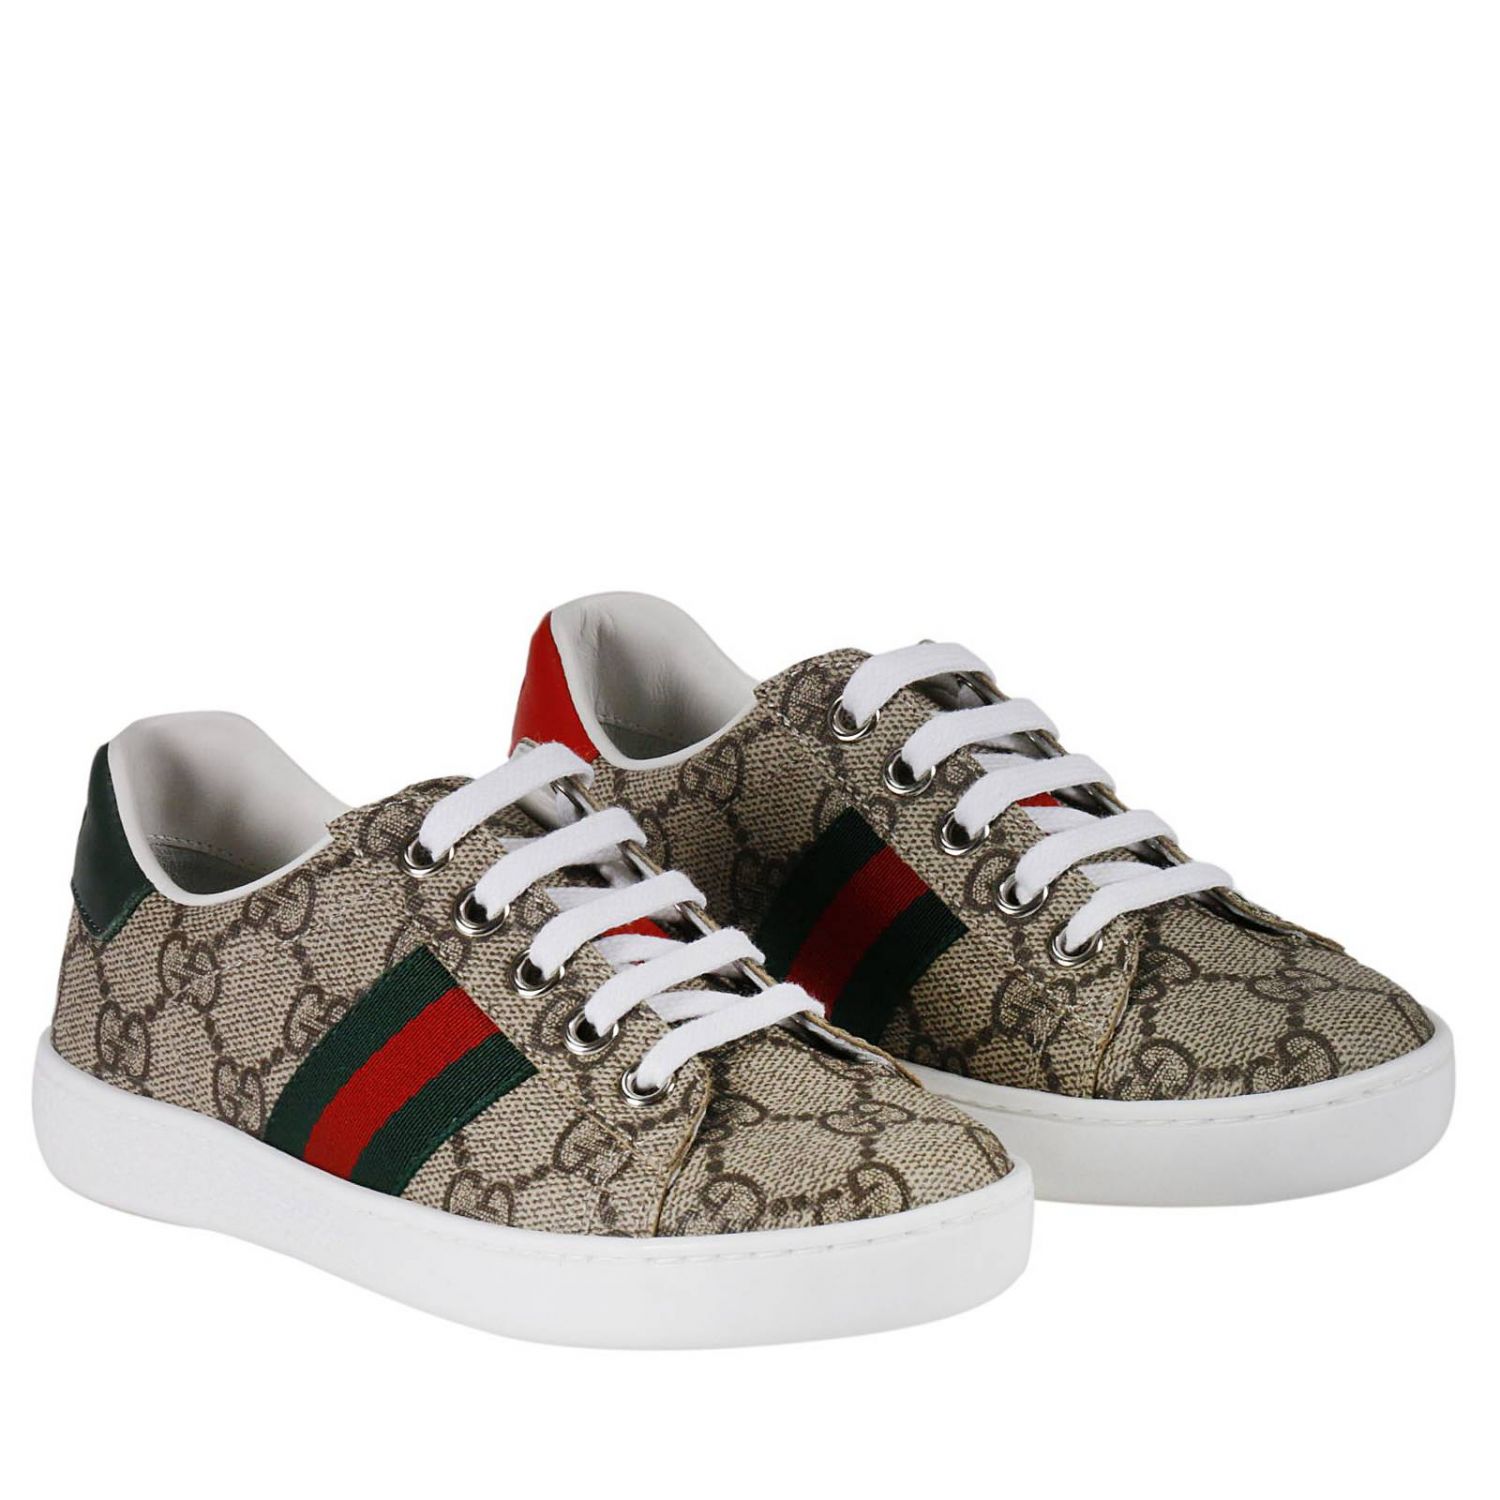 GUCCI: New Ace Sneakers in "GG" Supreme fabric with Web bands | Shoes